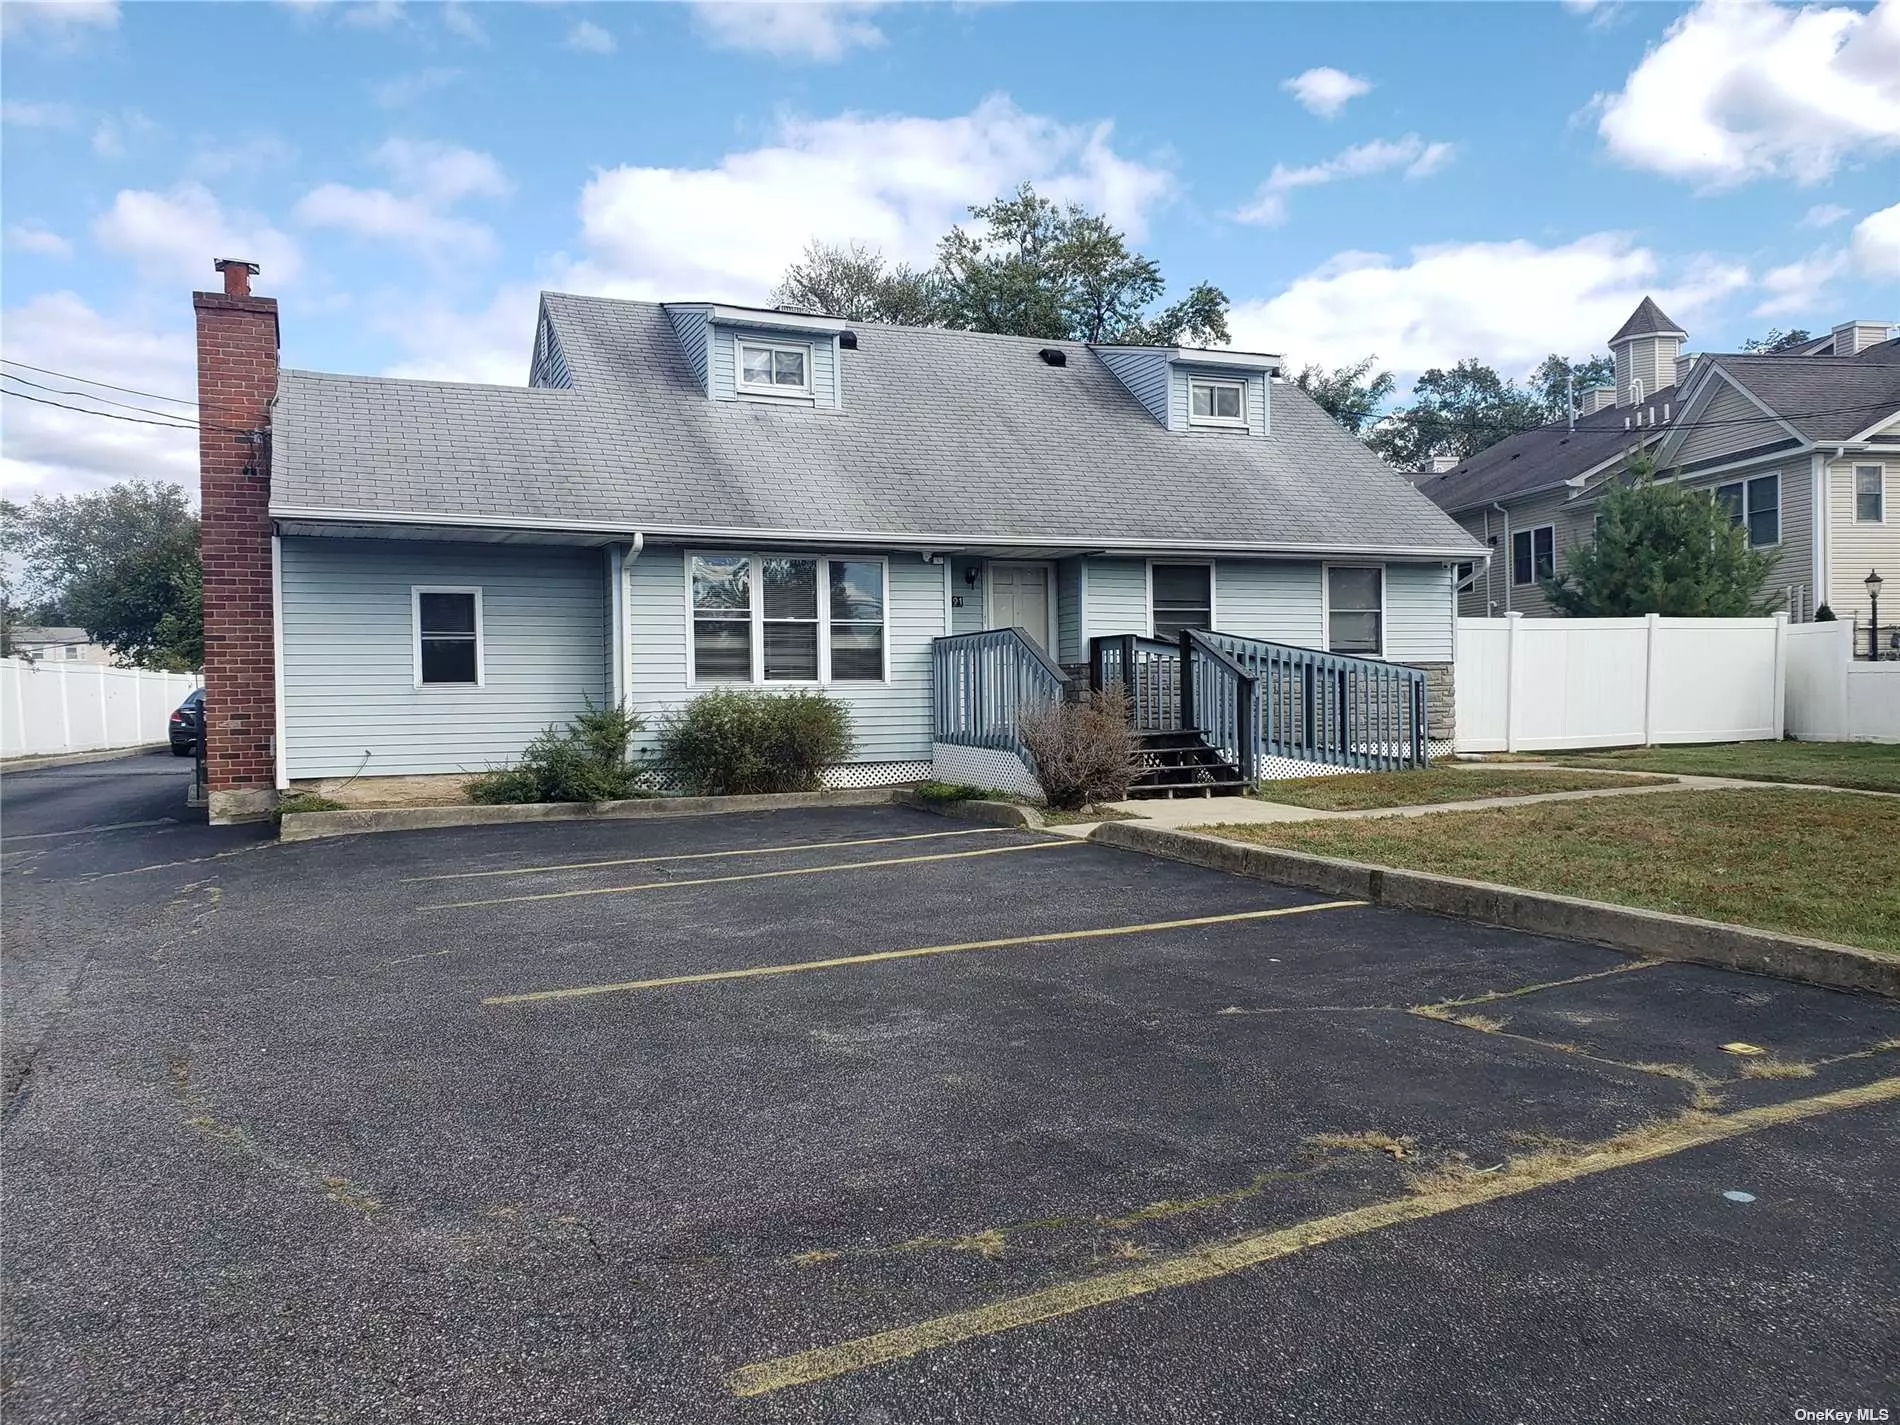 Commercial Property Zoned E Business Currently for Sale Only as an Investment Property. Tenant is Halo Network. Lease Expires July 31, 2025. Current Monthly Rent is $4, 500 until July 31, 2023. From August 1, 2023 to July 31, 2025, Rent is $4, 590/Month and $55, 080/Year. Net Annual Income of $36, 000.